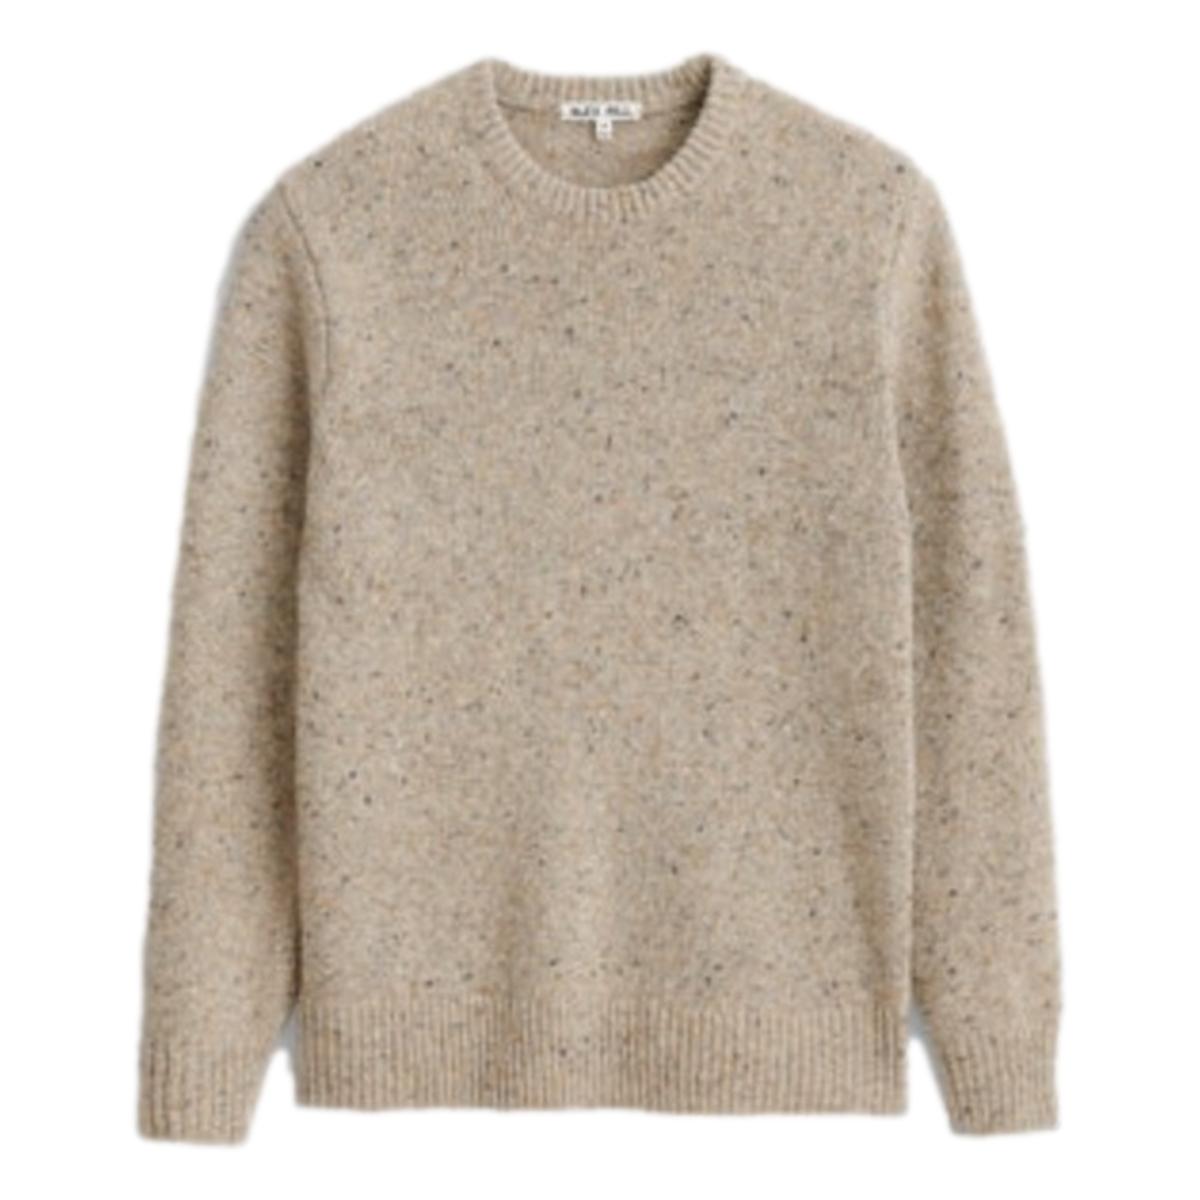 Donegal Crew Neck Sweater Oatmeal - Sweater